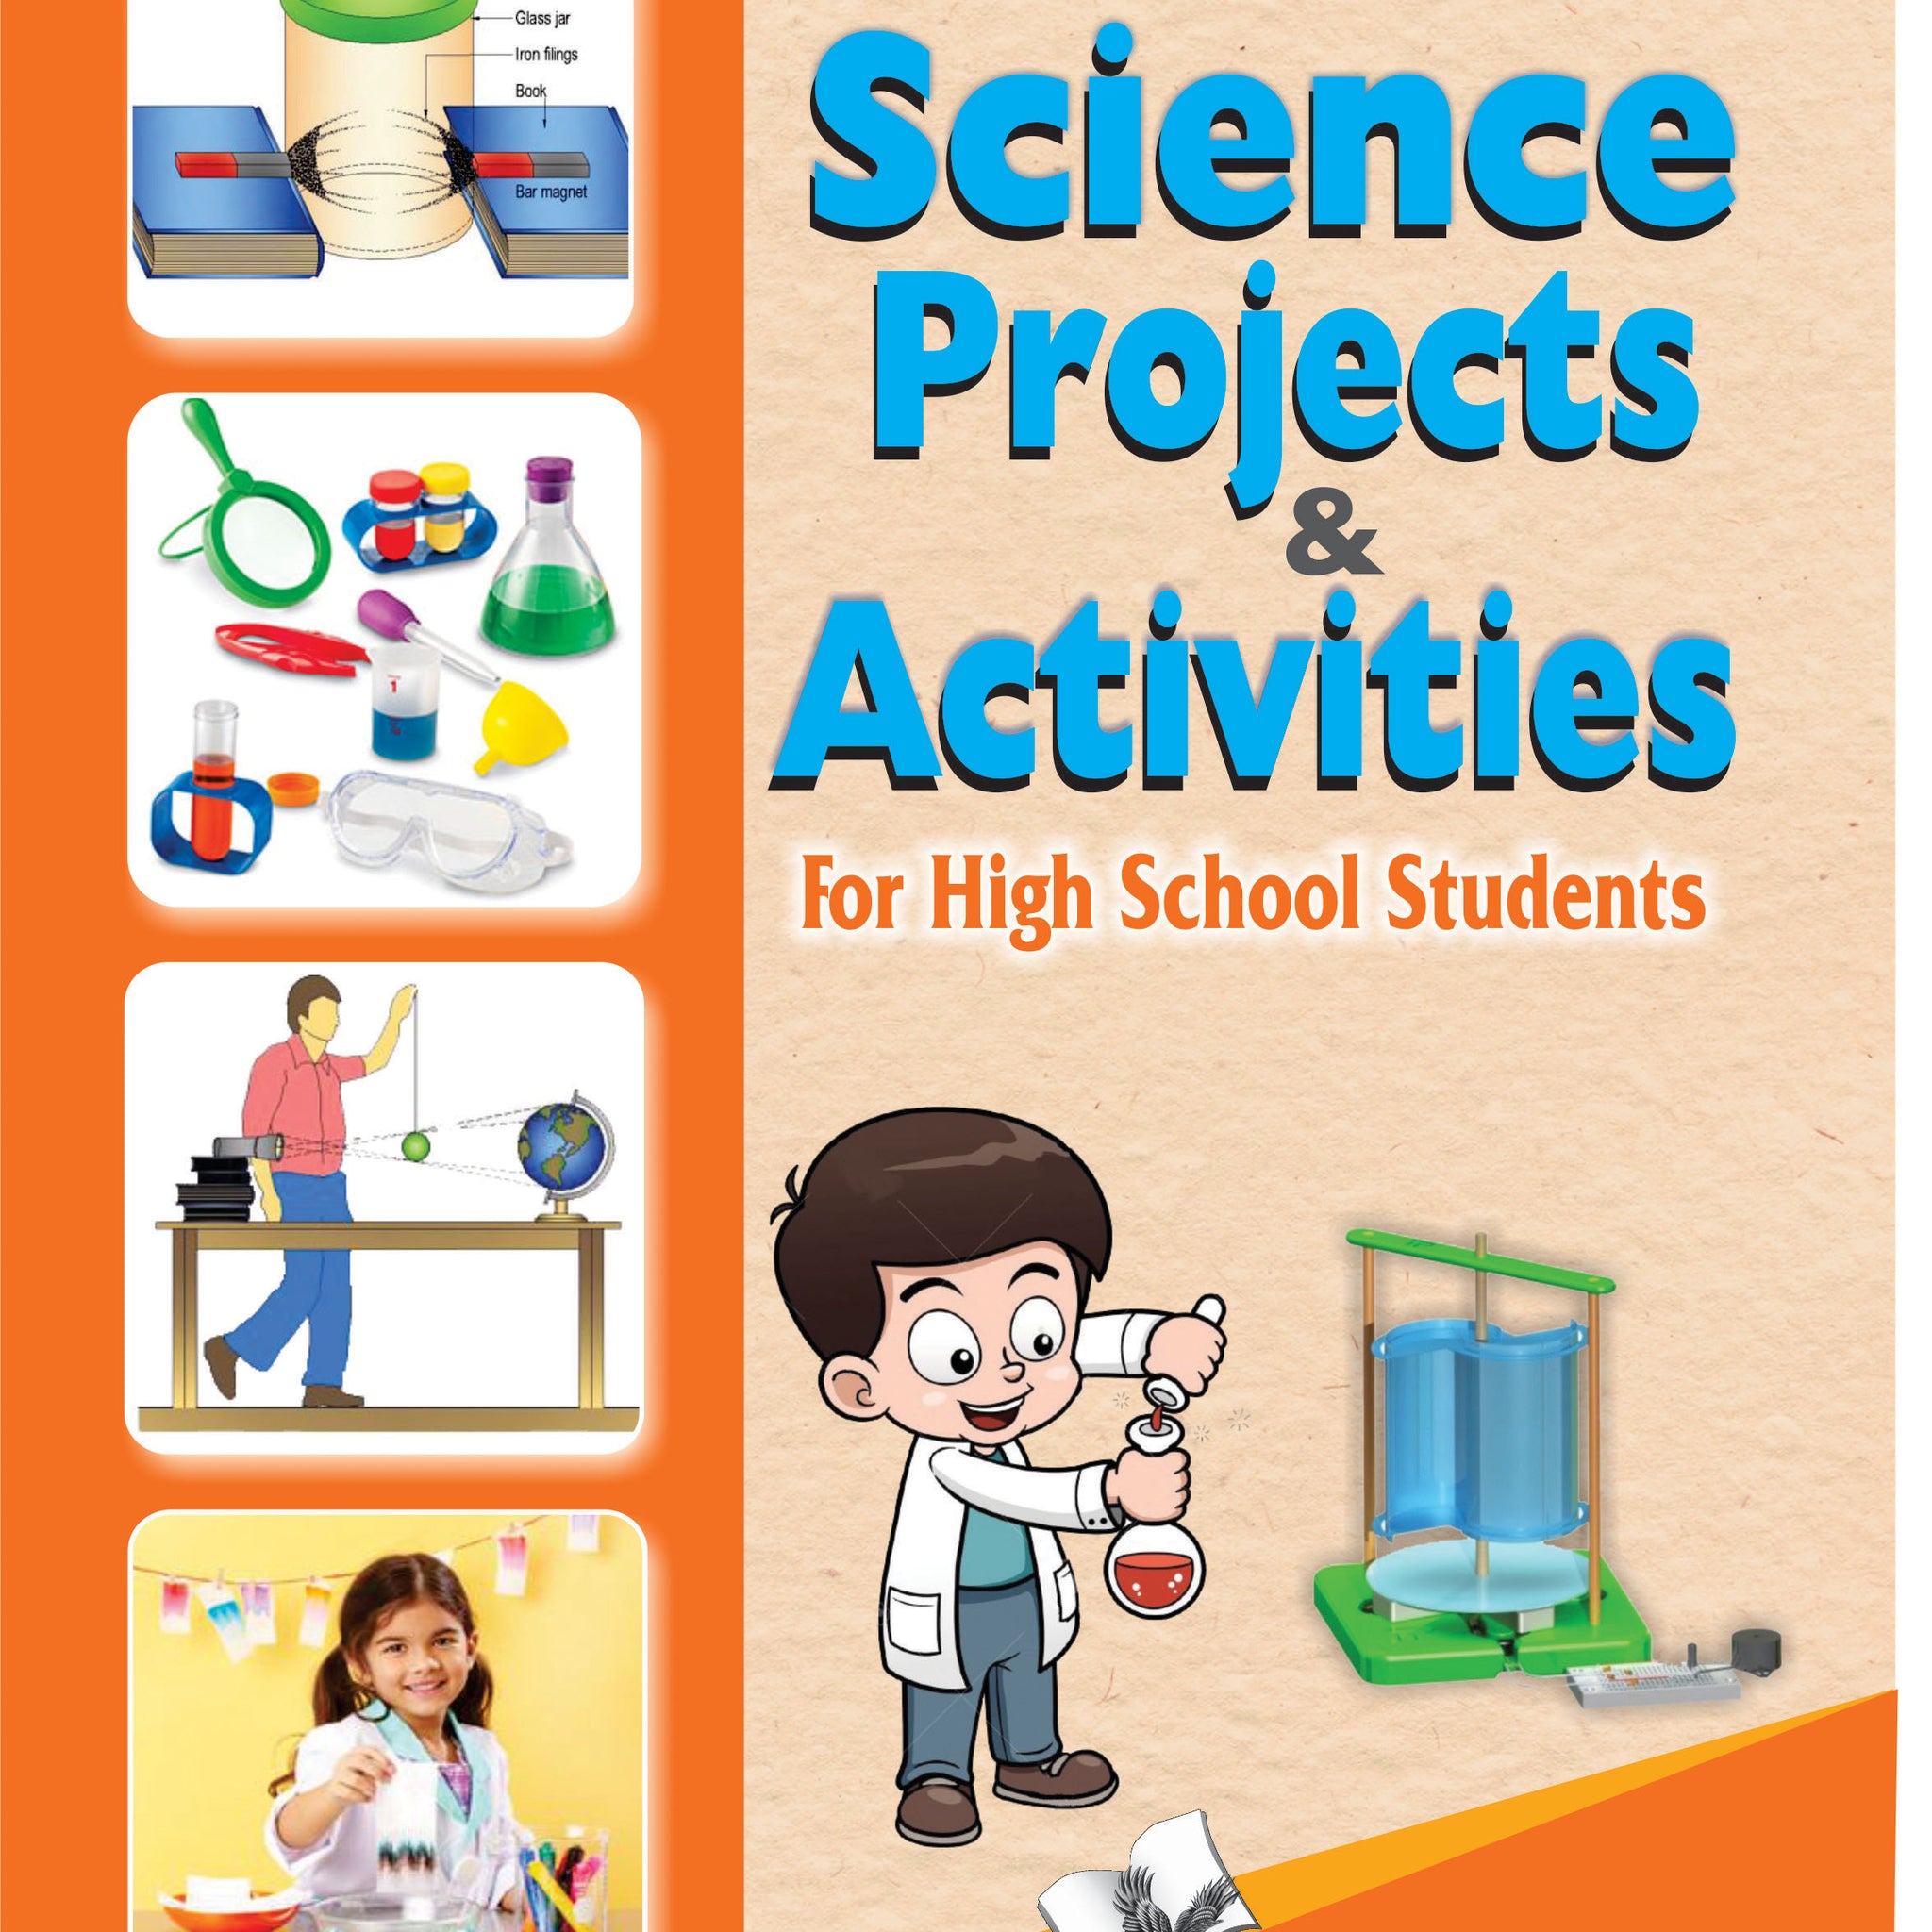 Science Projects & Activities